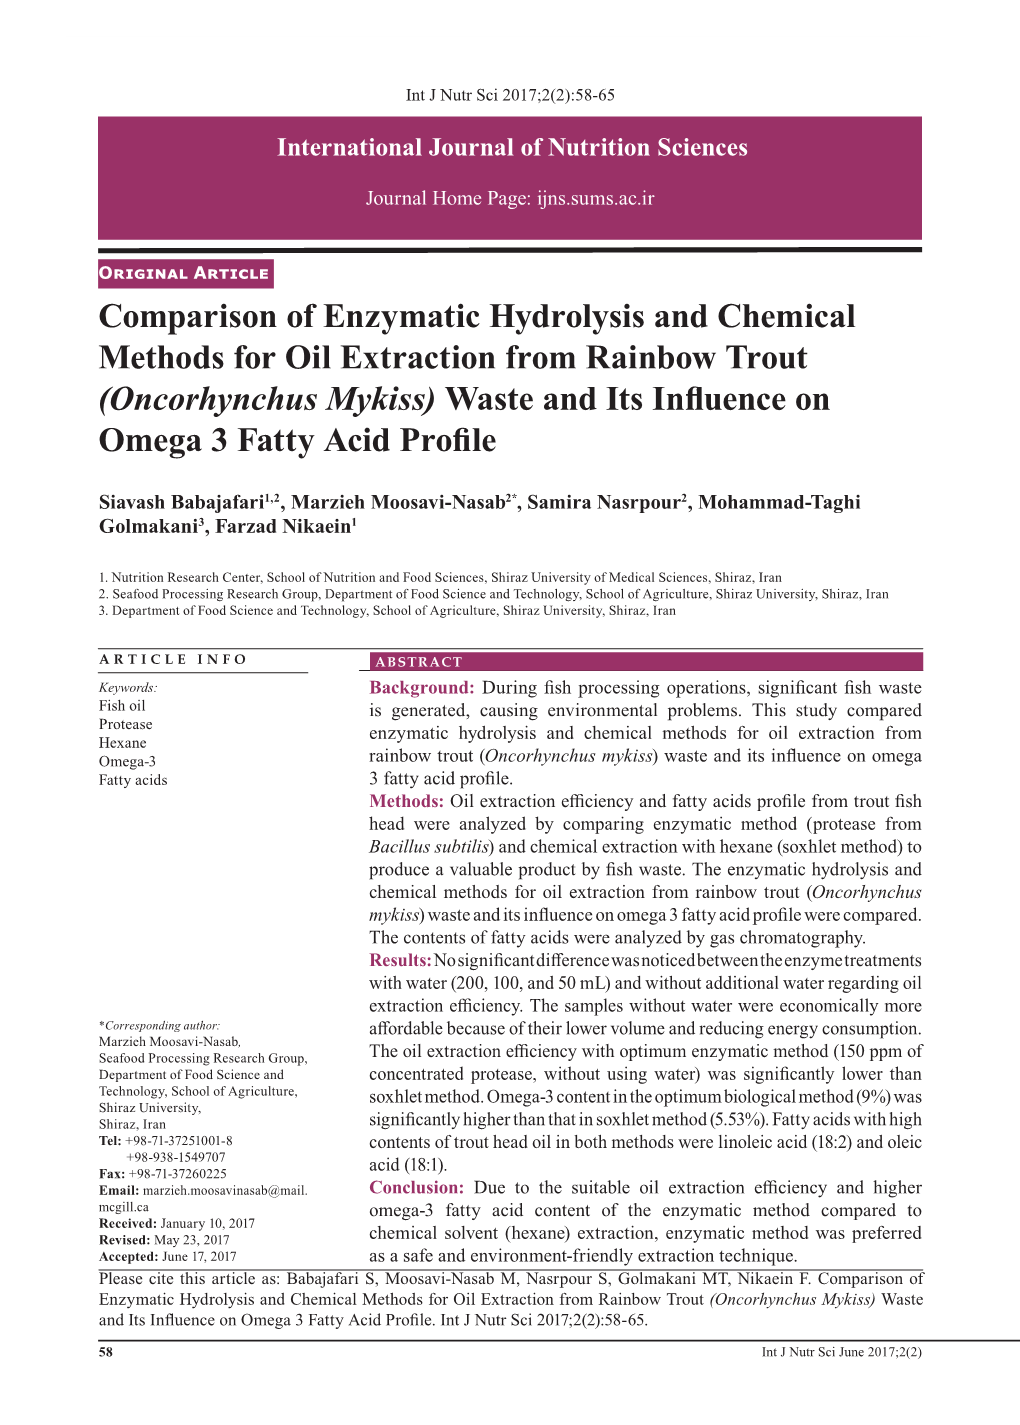 Comparison of Enzymatic Hydrolysis and Chemical Methods for Oil